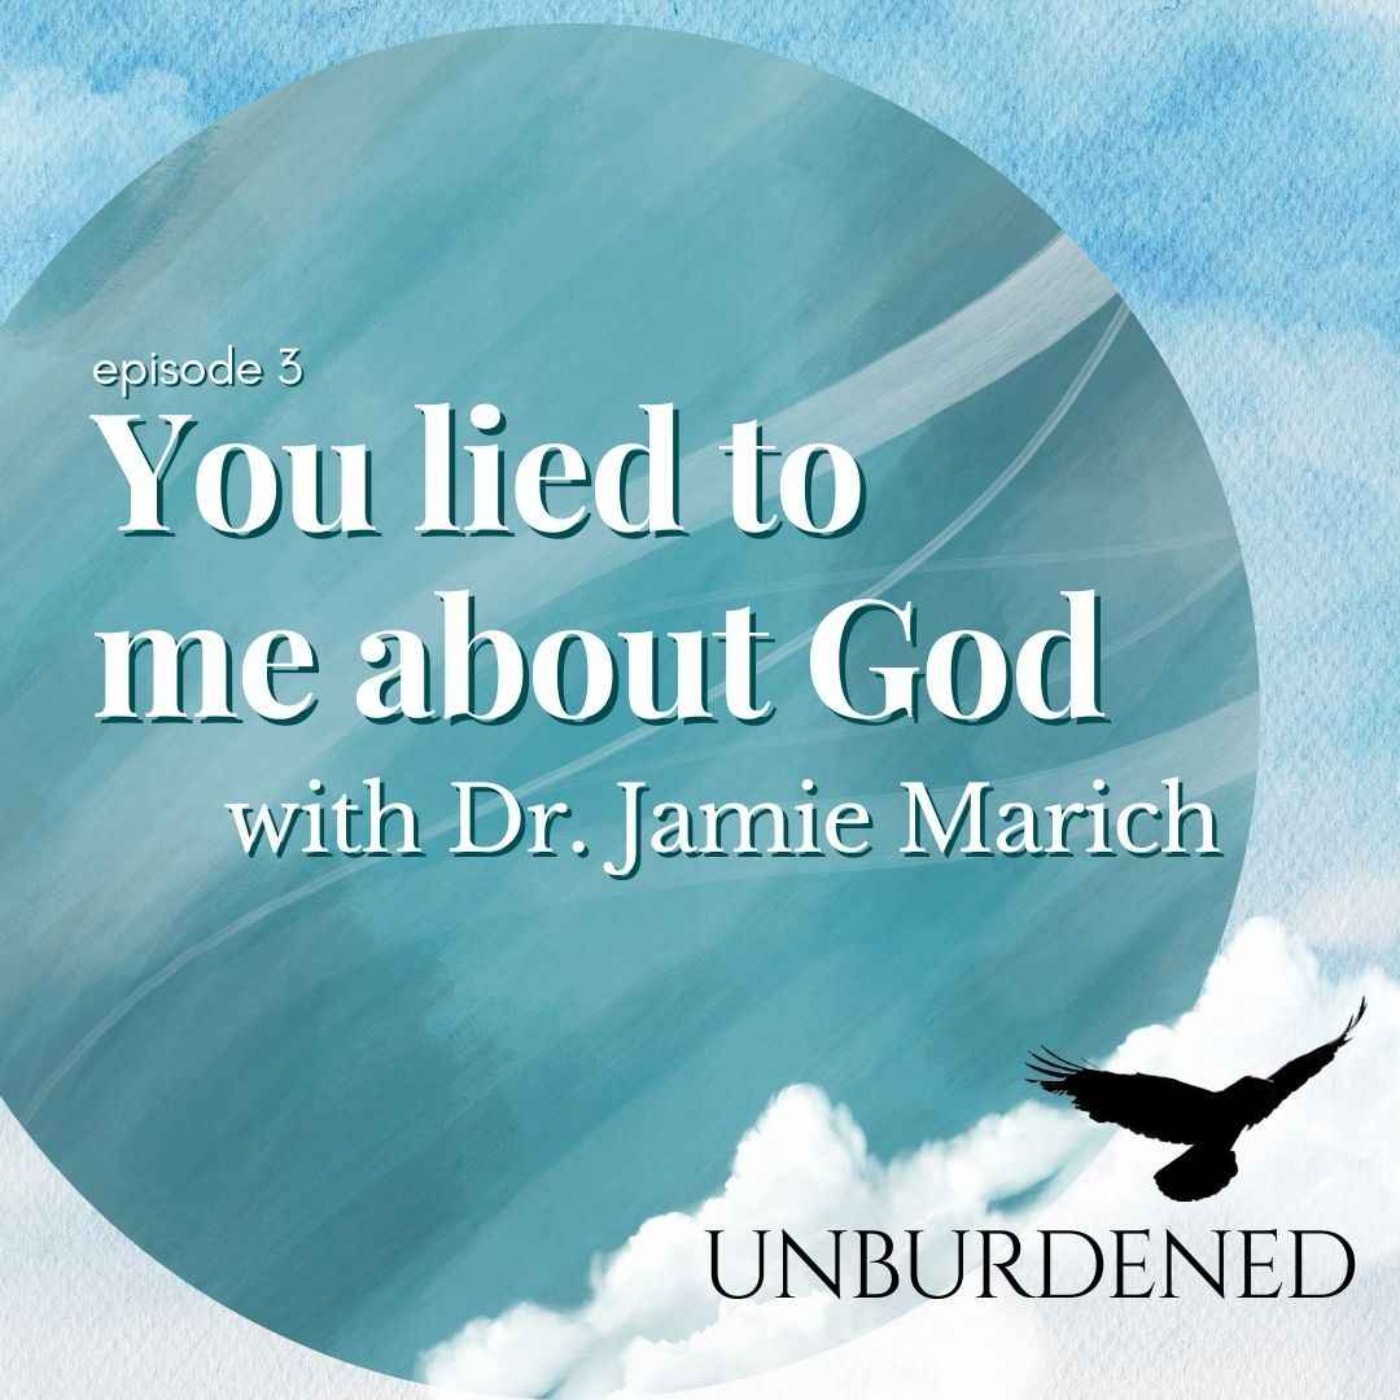 cover art for "You lied to me about God" with Dr. Jamie Marich